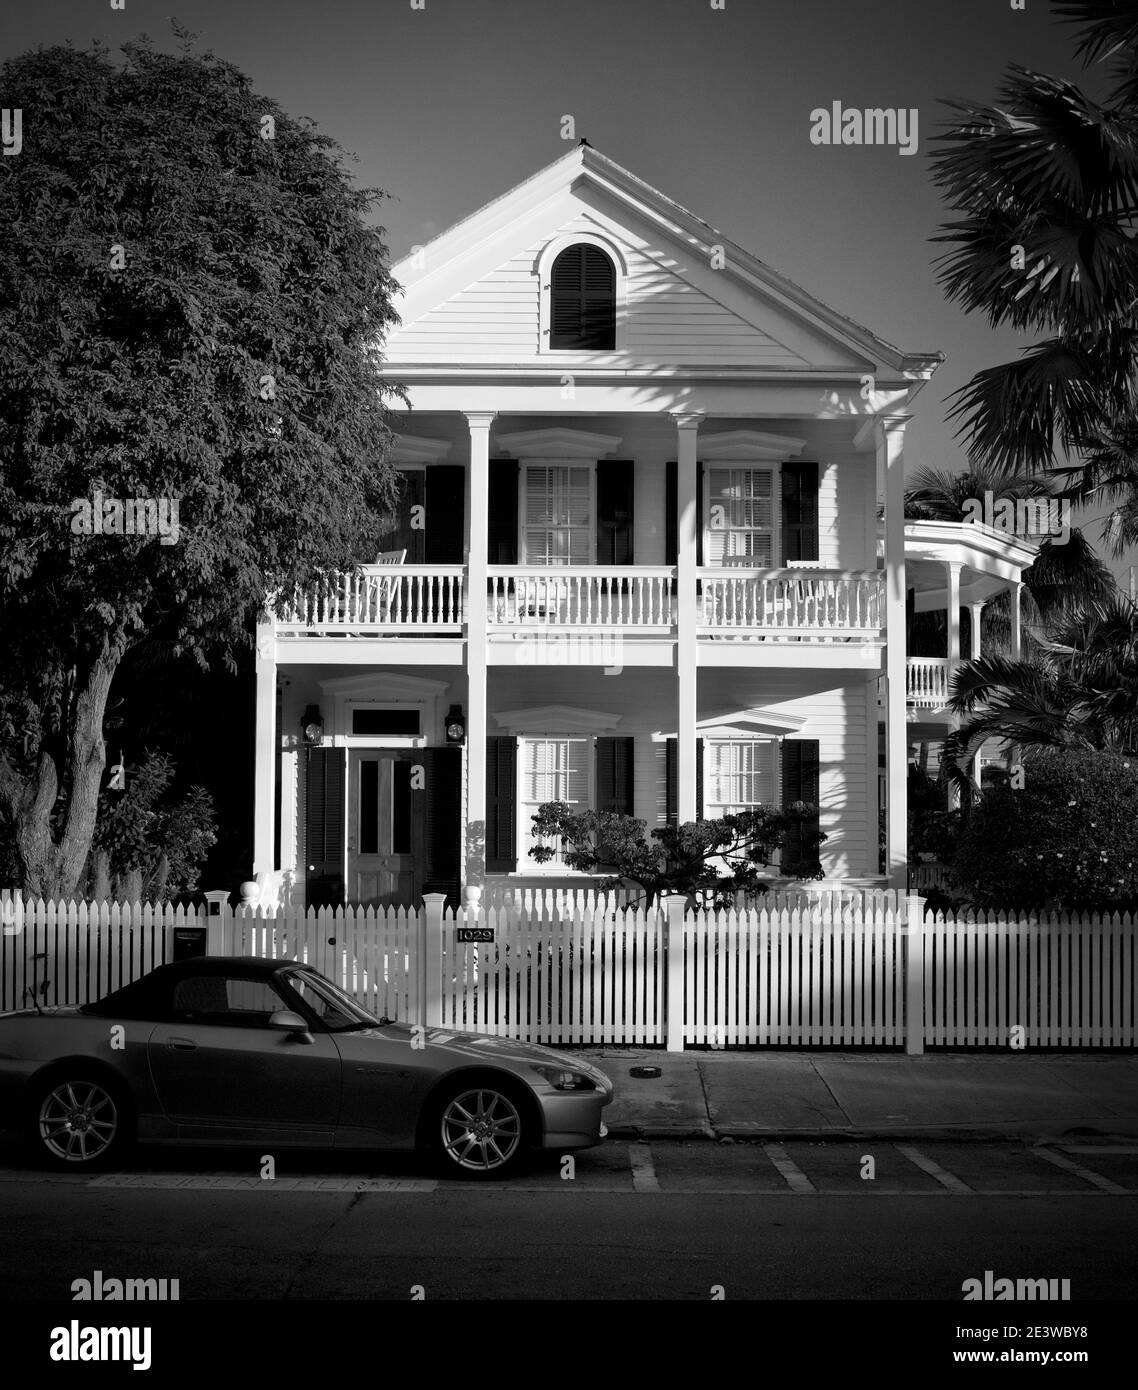 Classic house in Key West, FL, USA. Famous destination location. Stock Photo